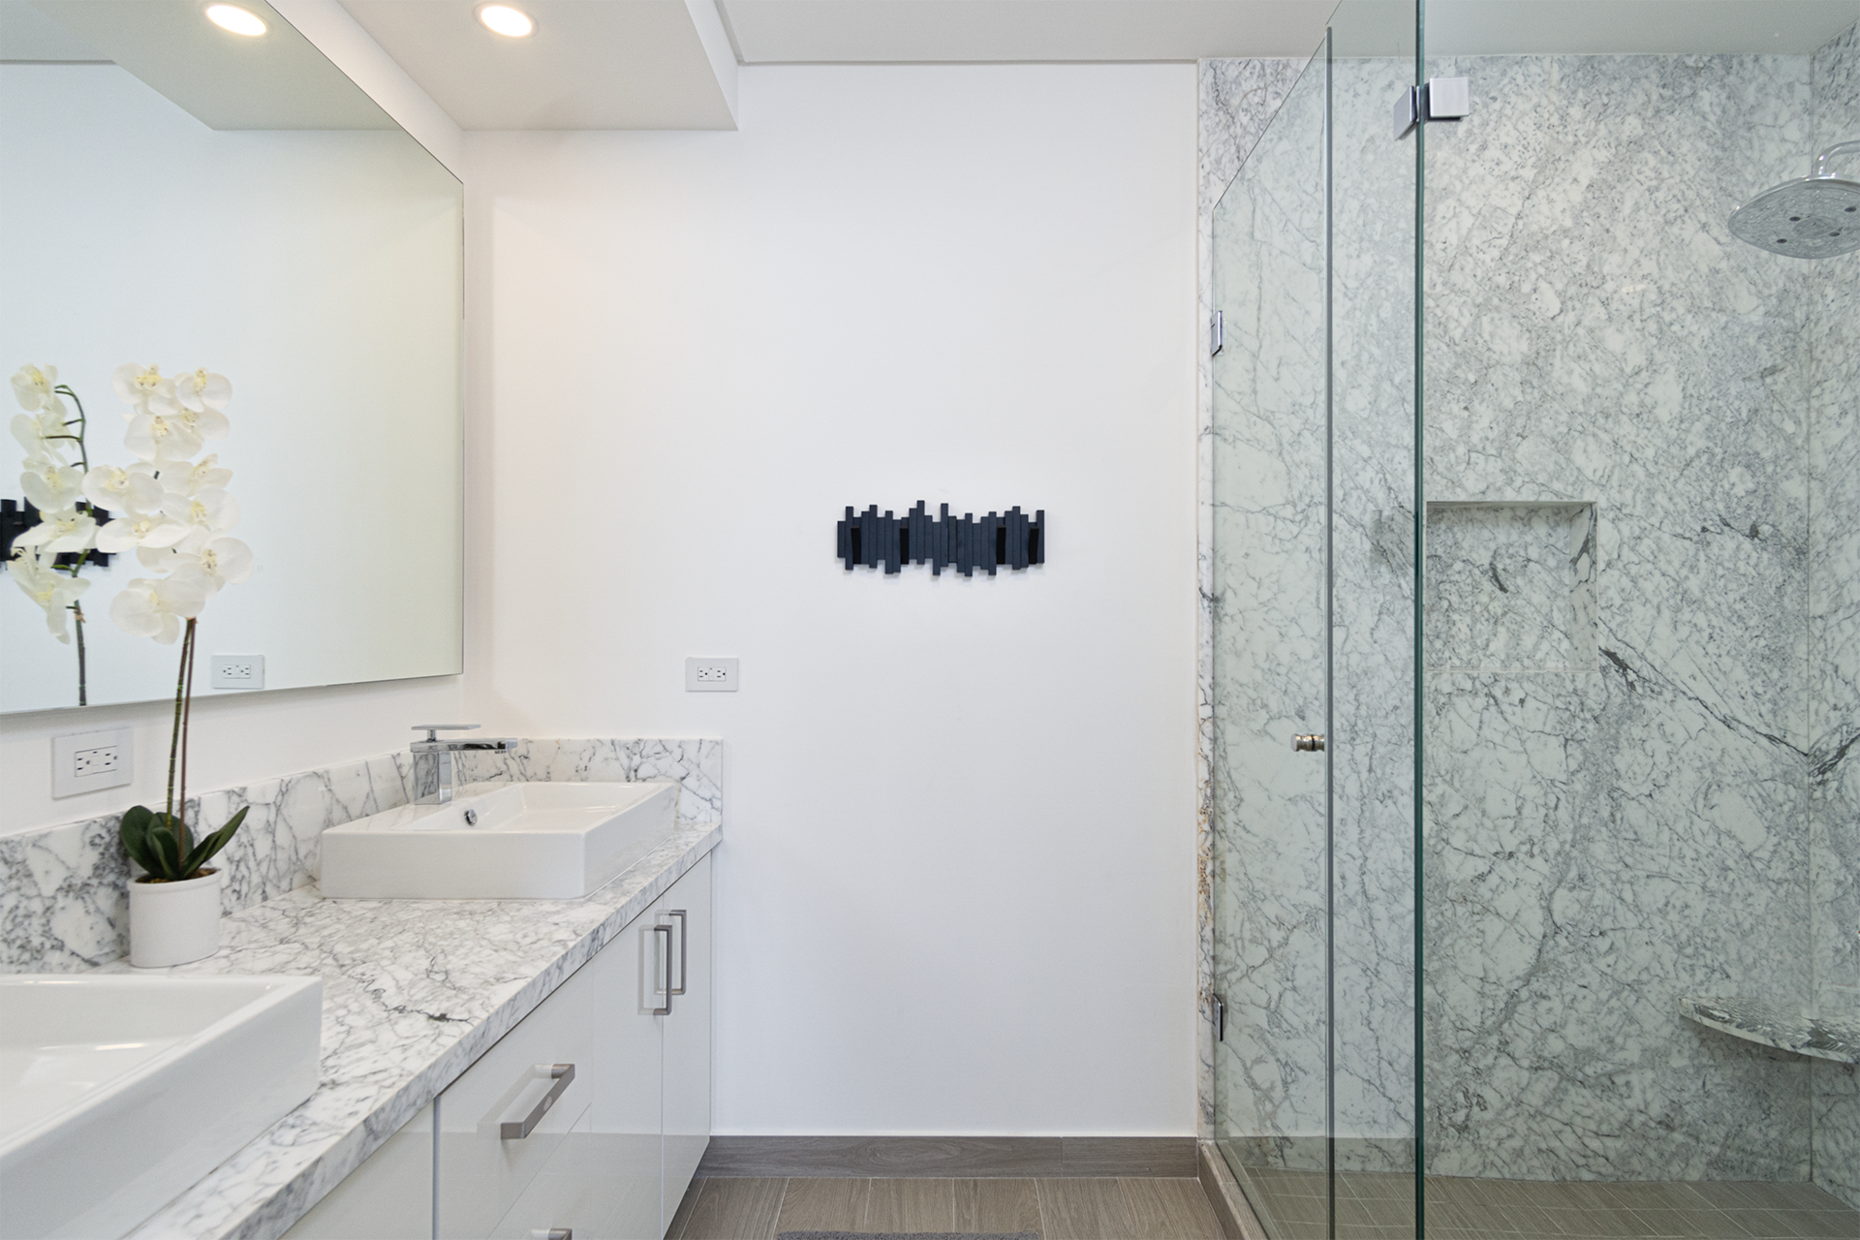 Details of the main bathroom include marbled countertop and shower stall.